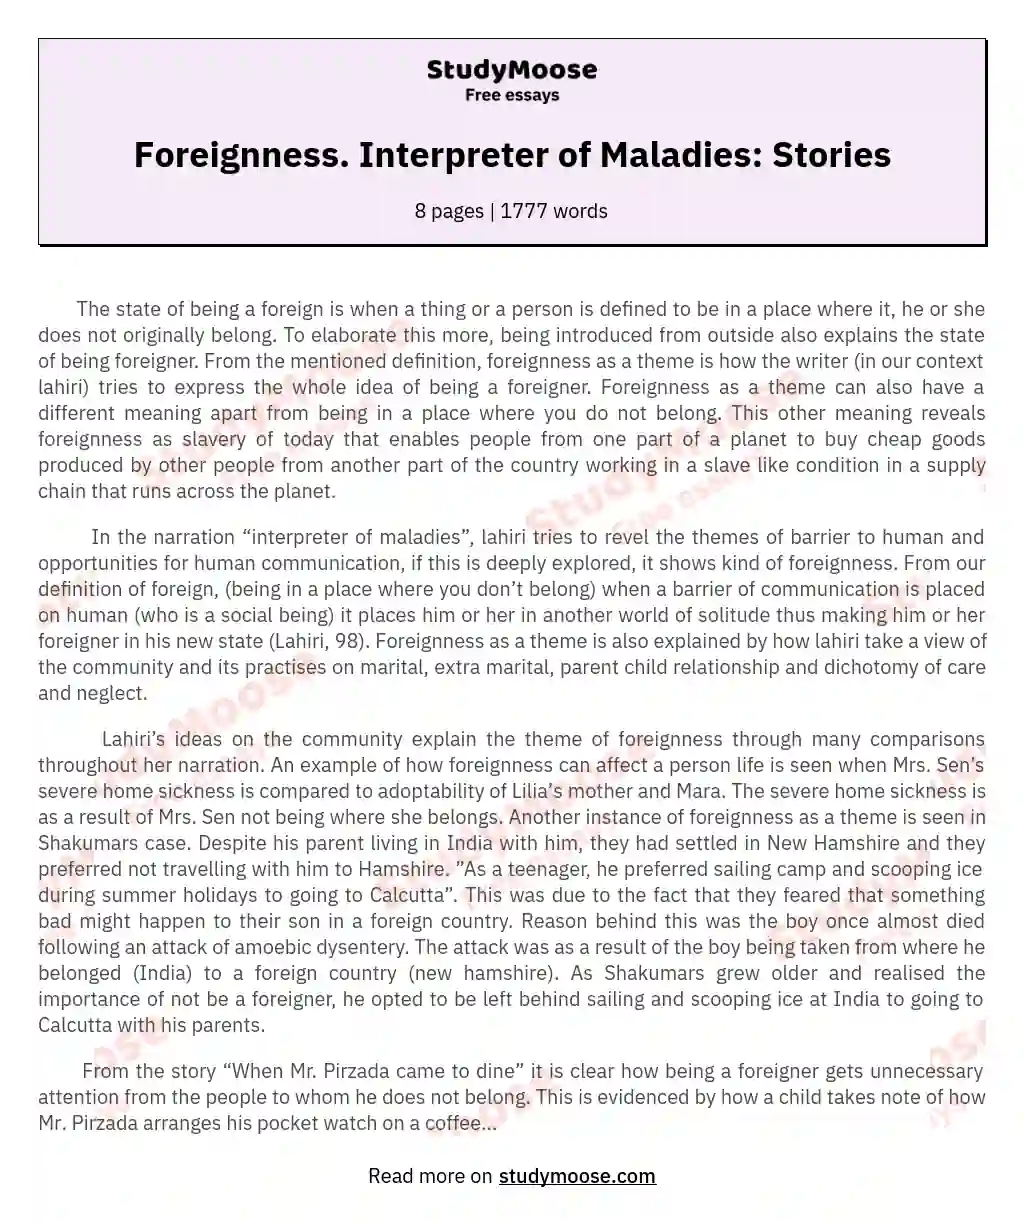 Foreignness. Interpreter of Maladies: Stories essay